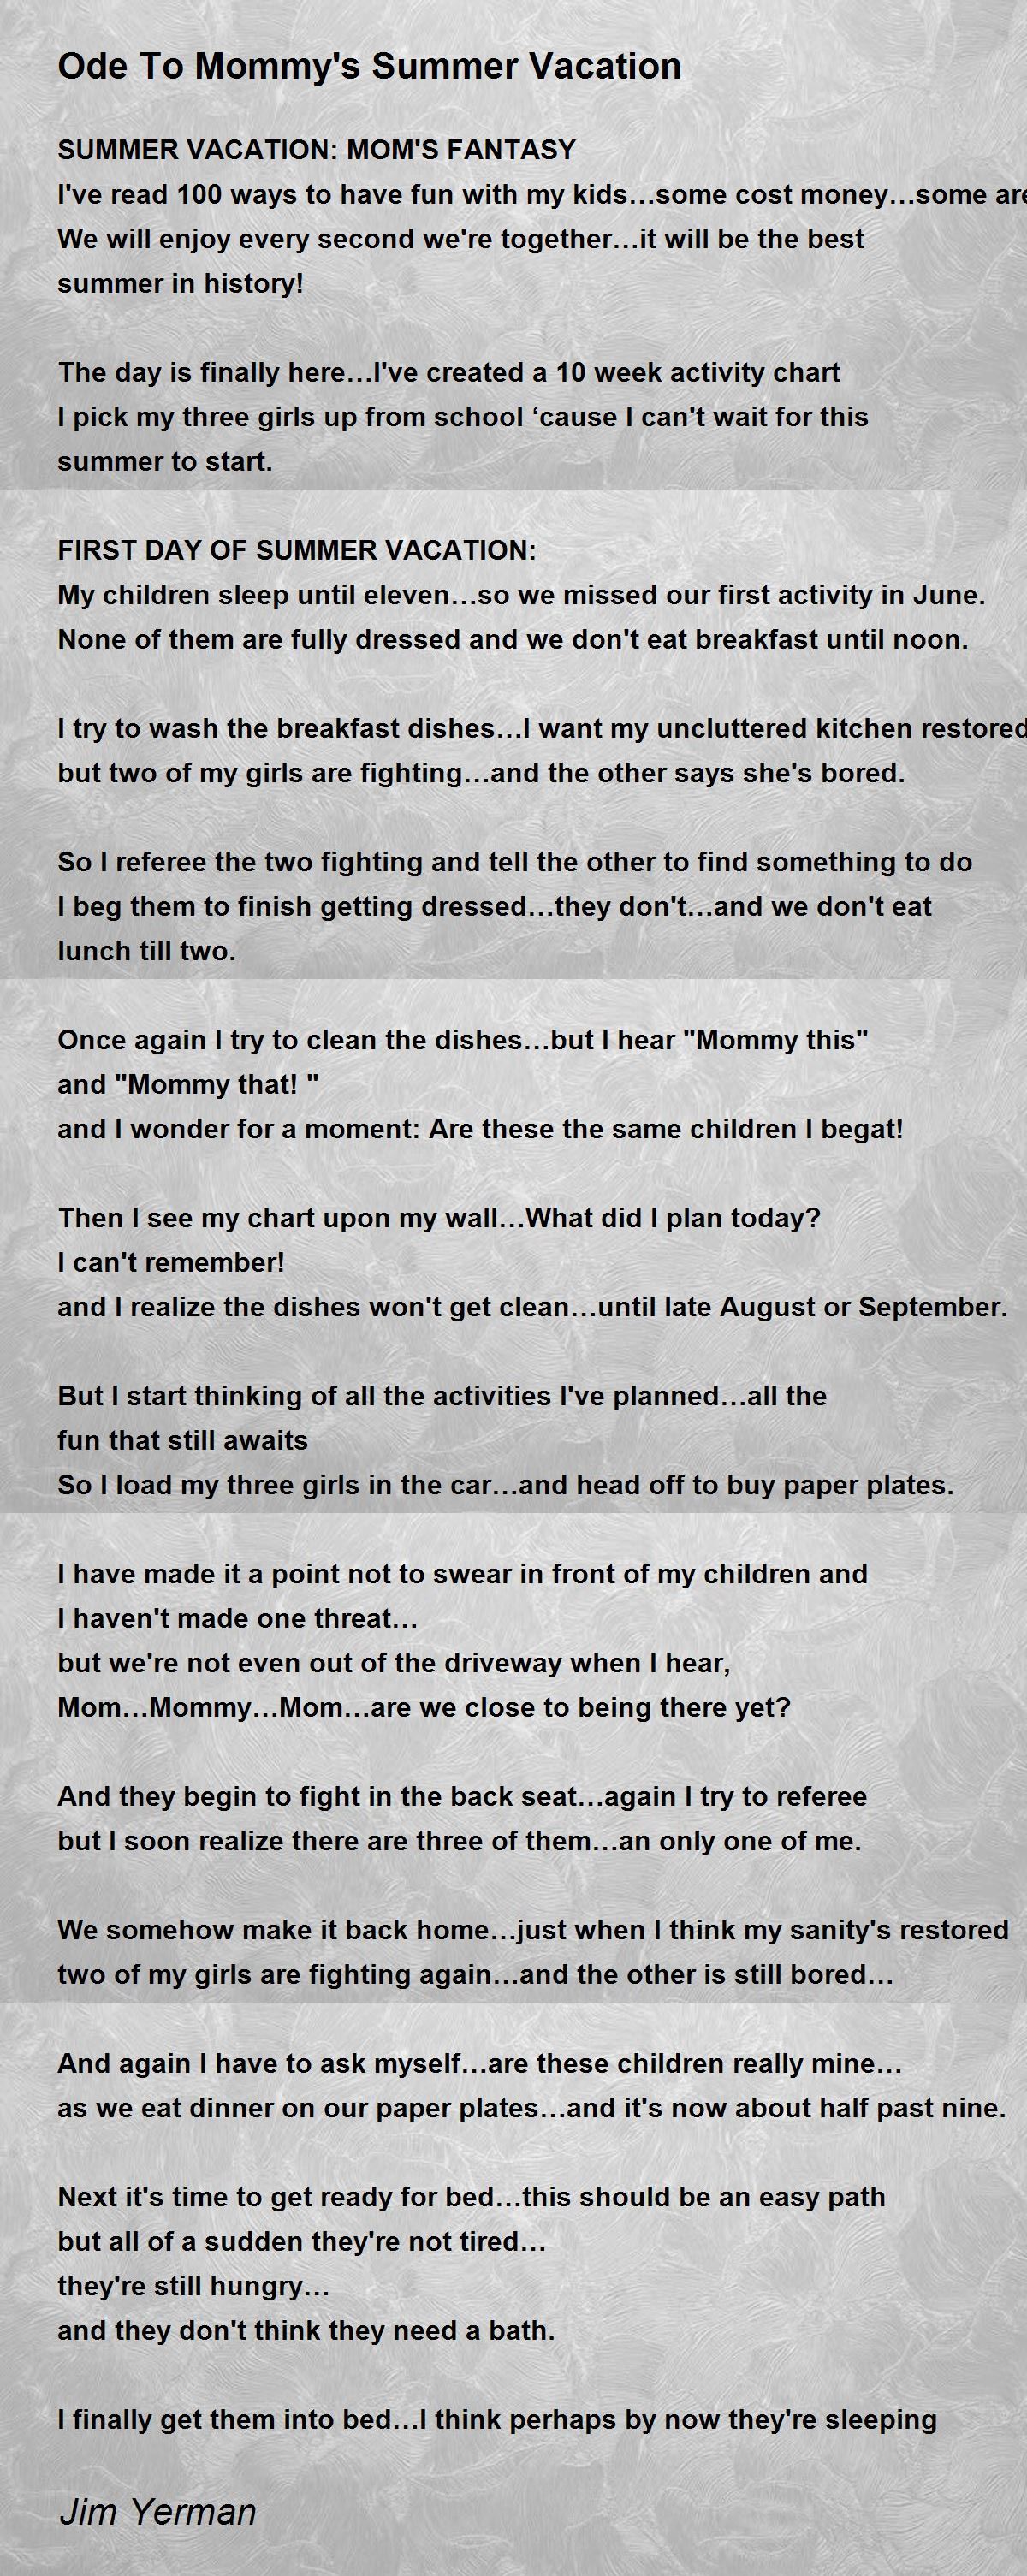 Ode To Mommy's Summer Vacation - Ode To Mommy's Summer Vacation Poem by ...